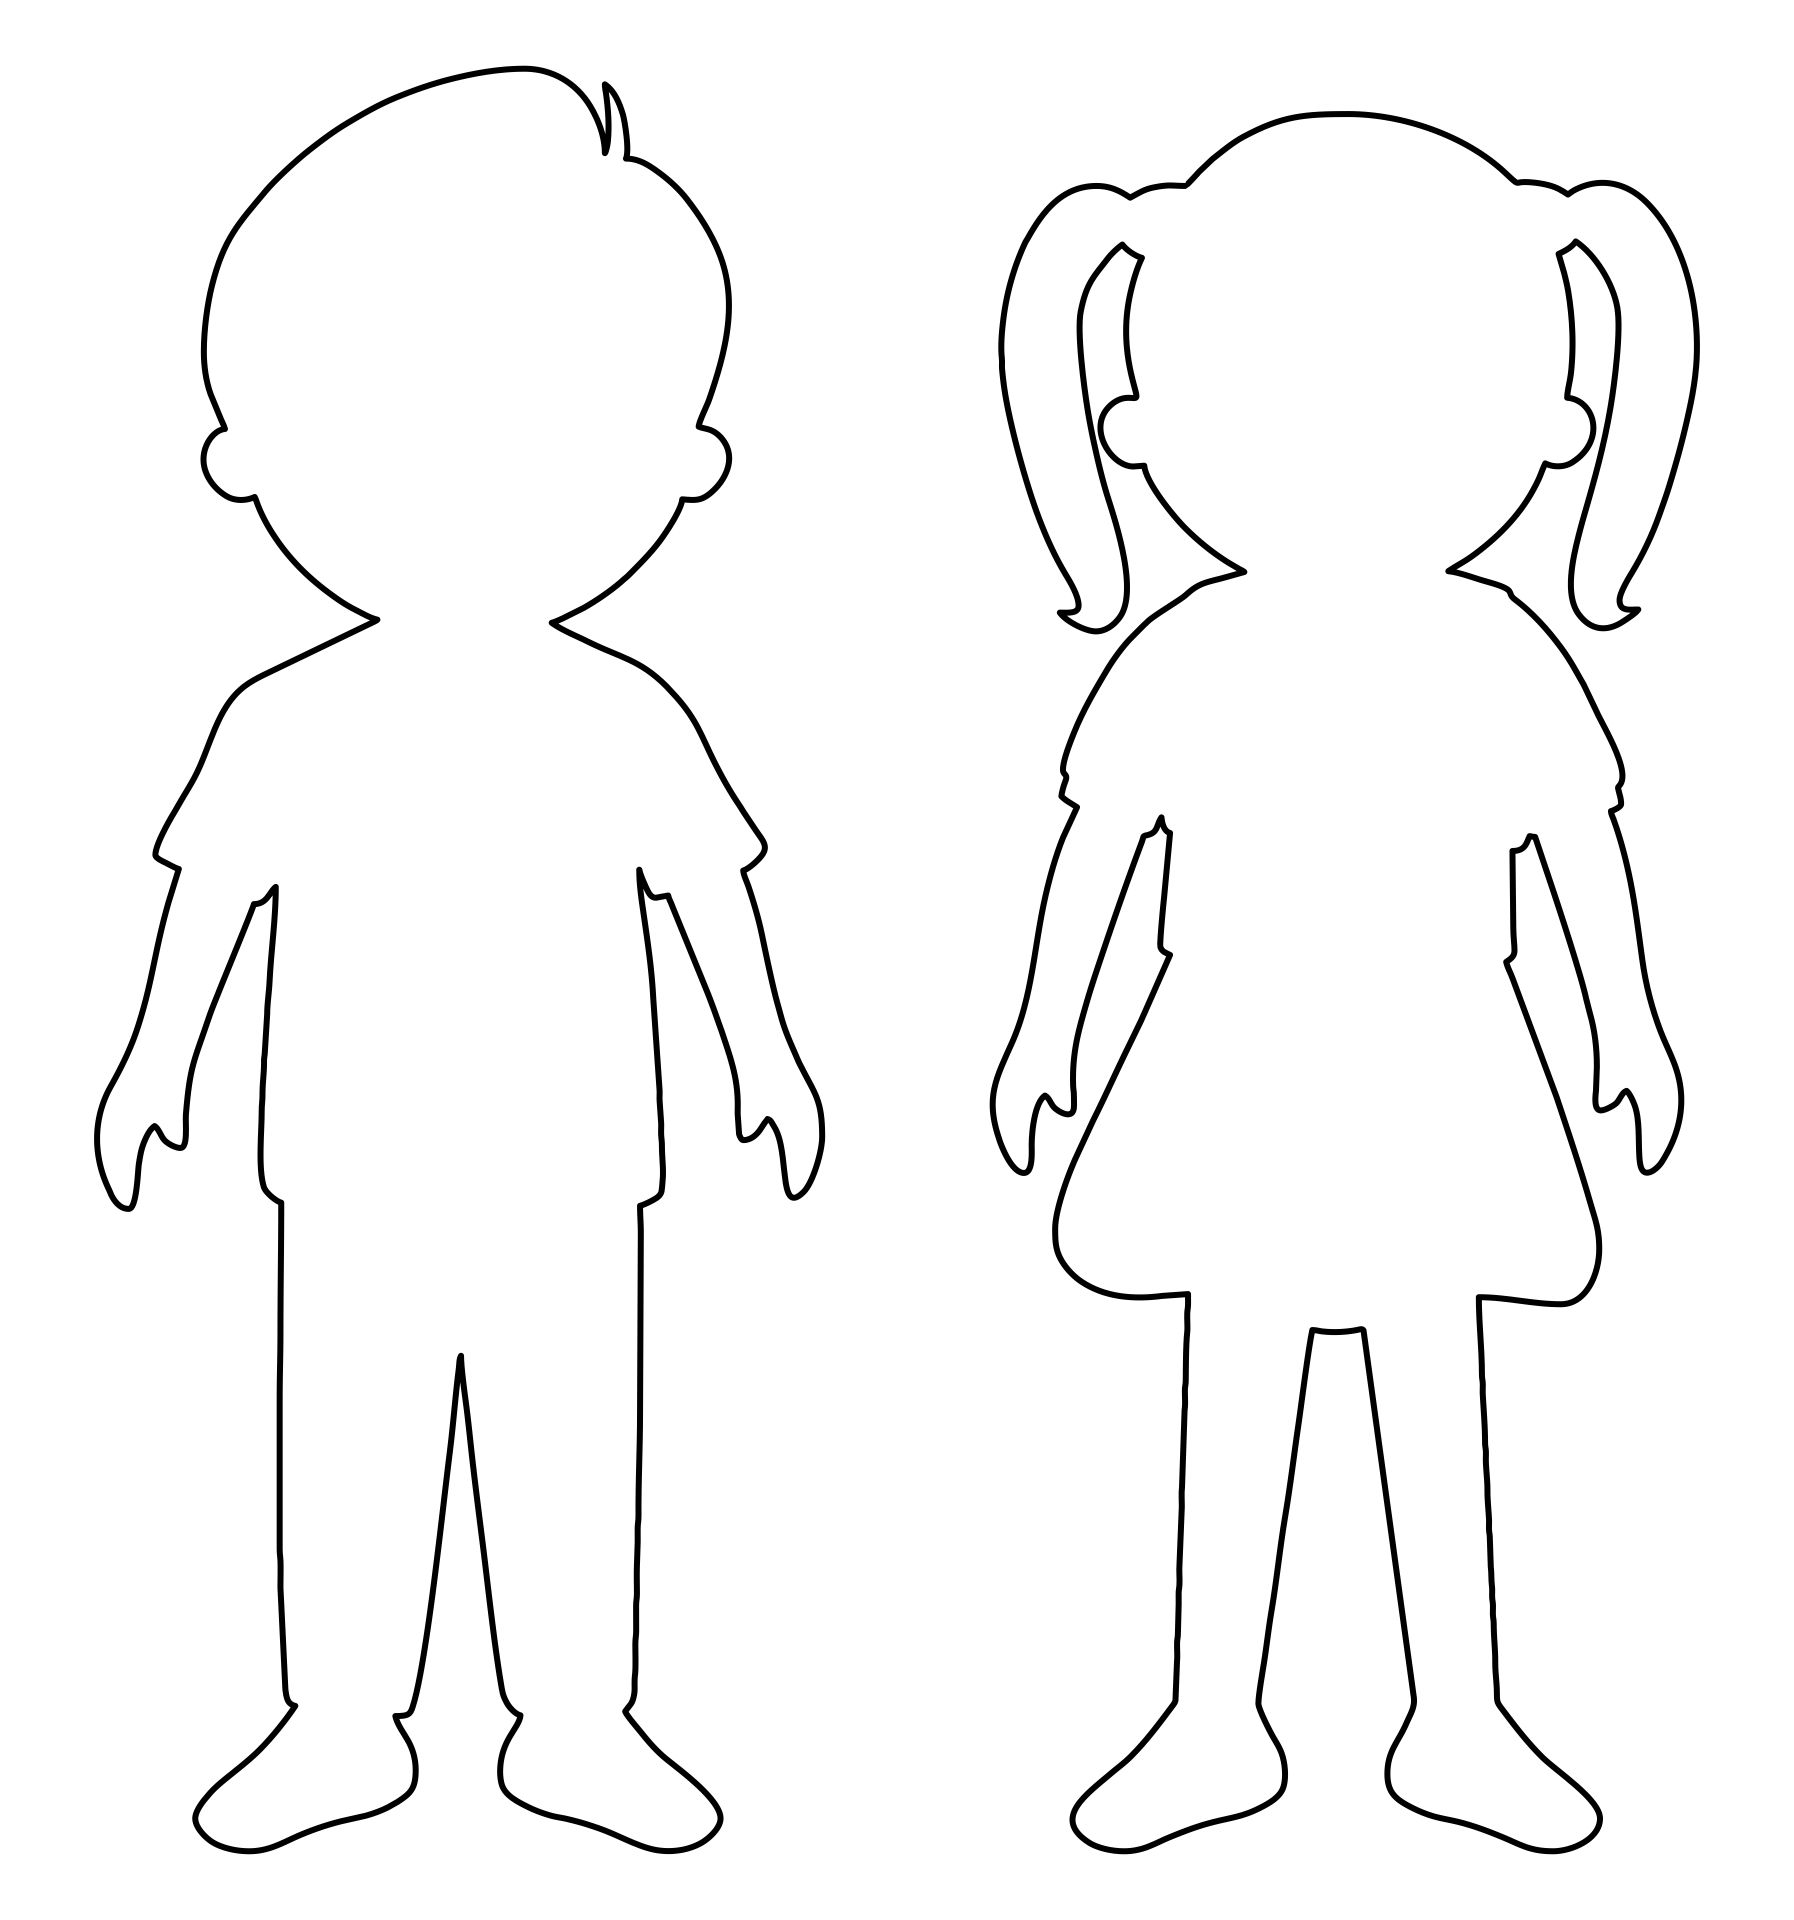 5 Best Images of Chain People Printable Paper Doll Chain Template, How to Make a Paper Person